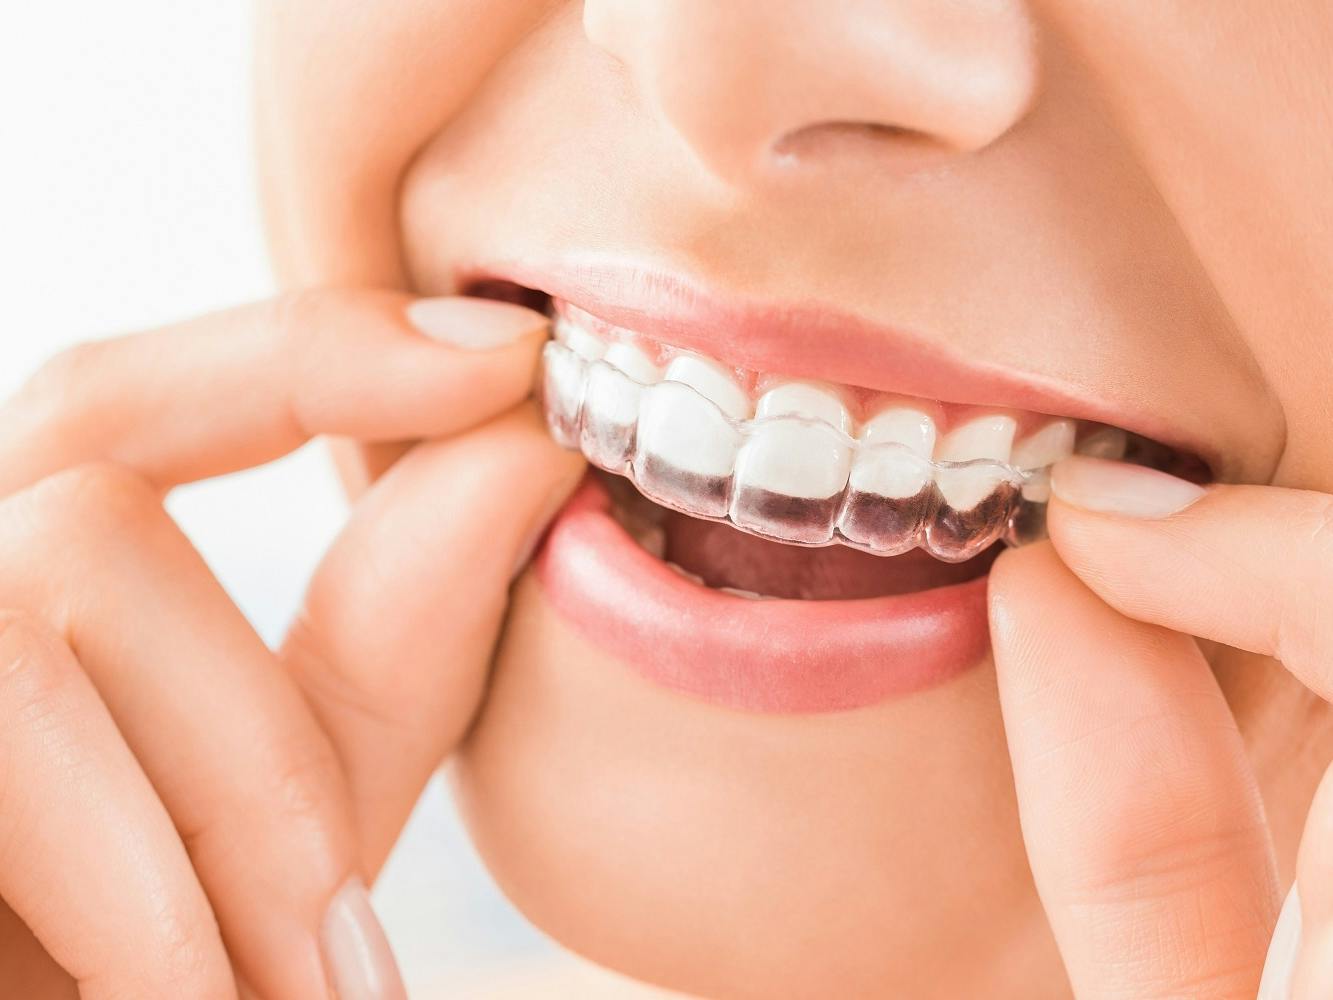 Does Medicare Cover Invisalign